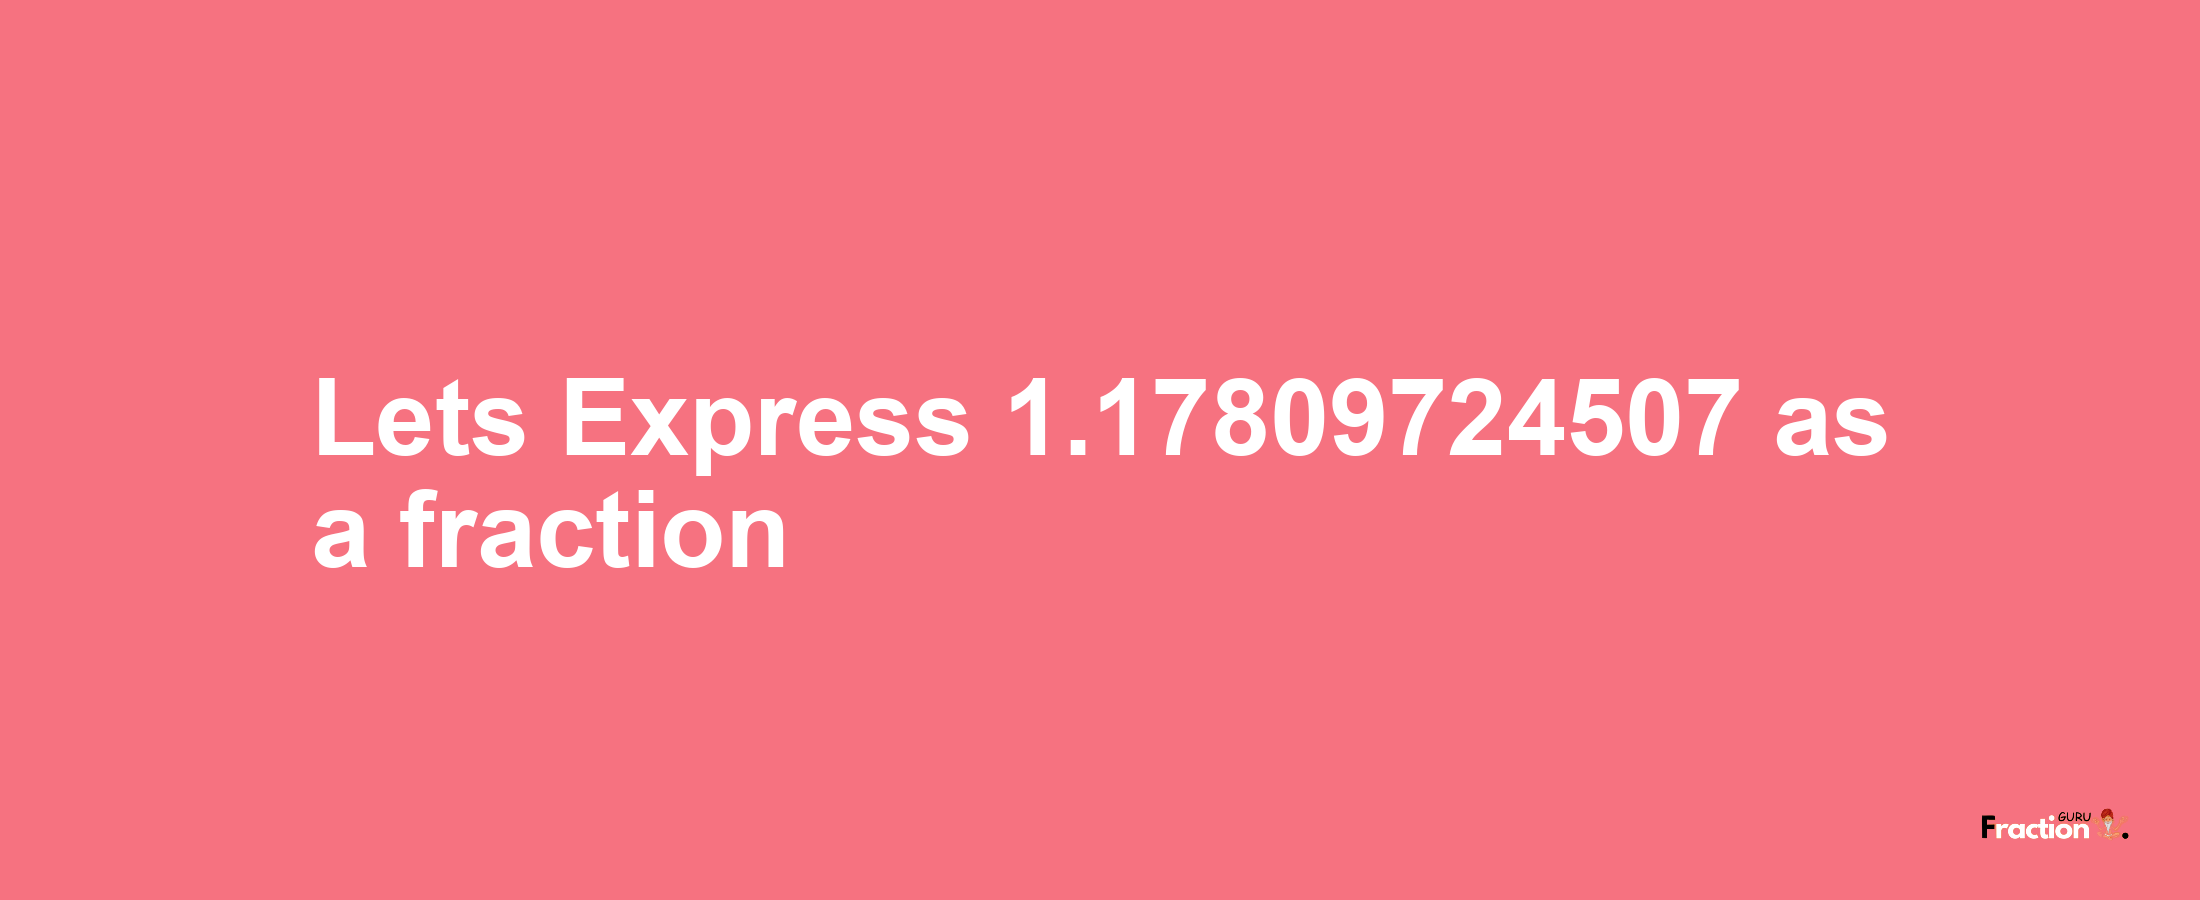 Lets Express 1.17809724507 as afraction